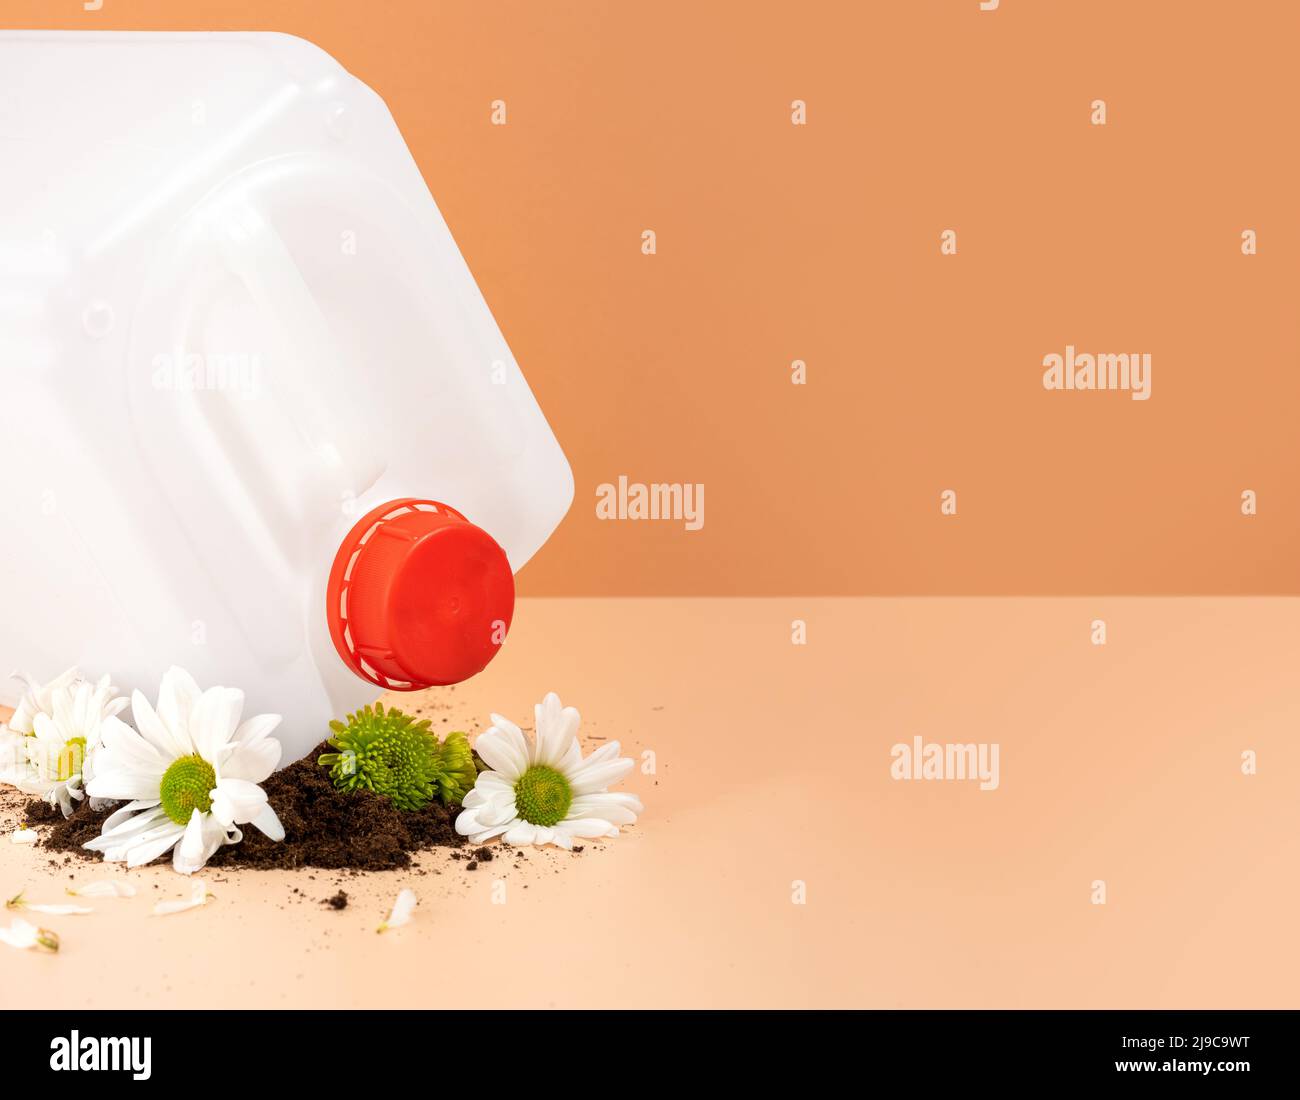 Negative impact on nature. Plastic canister crushes beautiful flowers on an orange background. The concept of environmental damage. Stock Photo